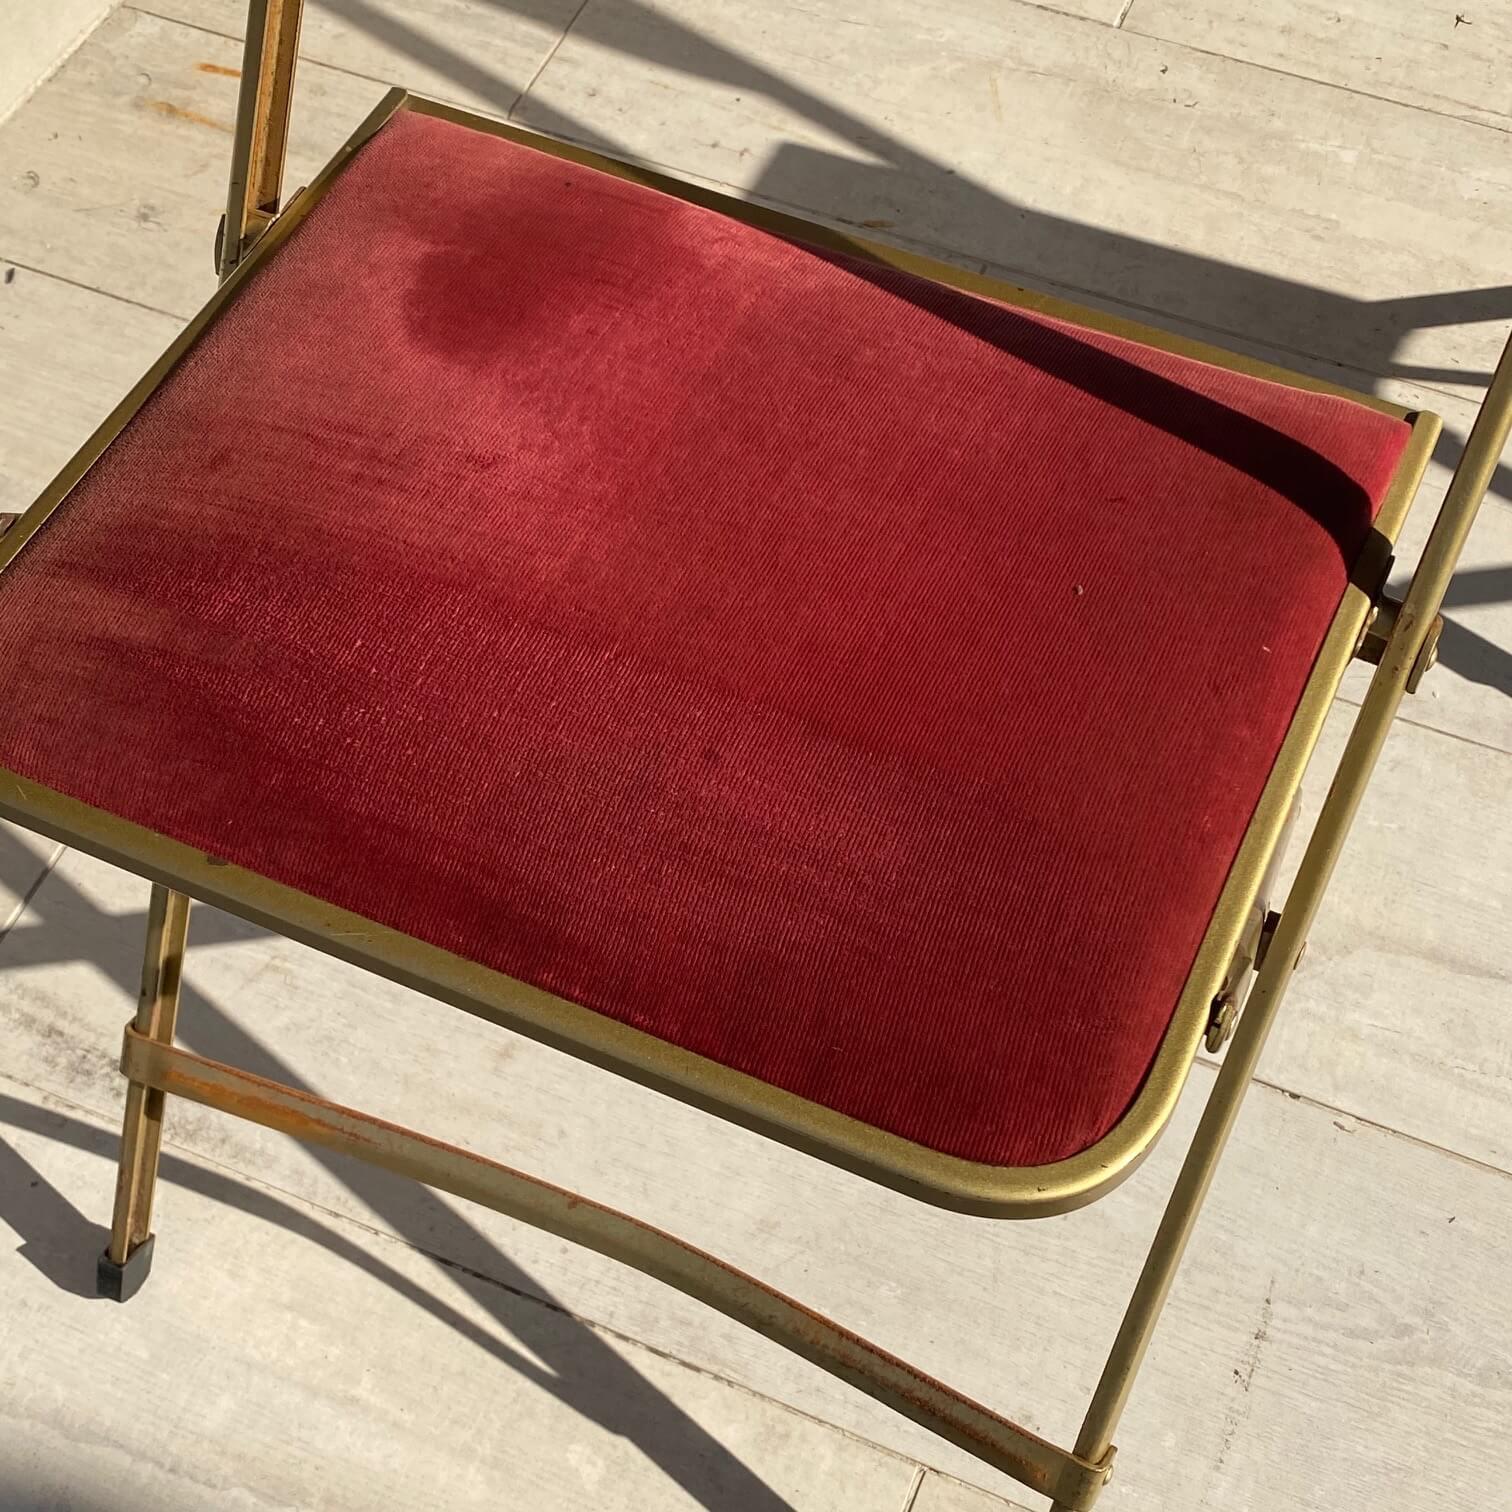 These chairs are in guilt metal, the have been made in France in the 1970s.
The fabric is red, and we can see some task, every details, on every task are in the detailed pictures.